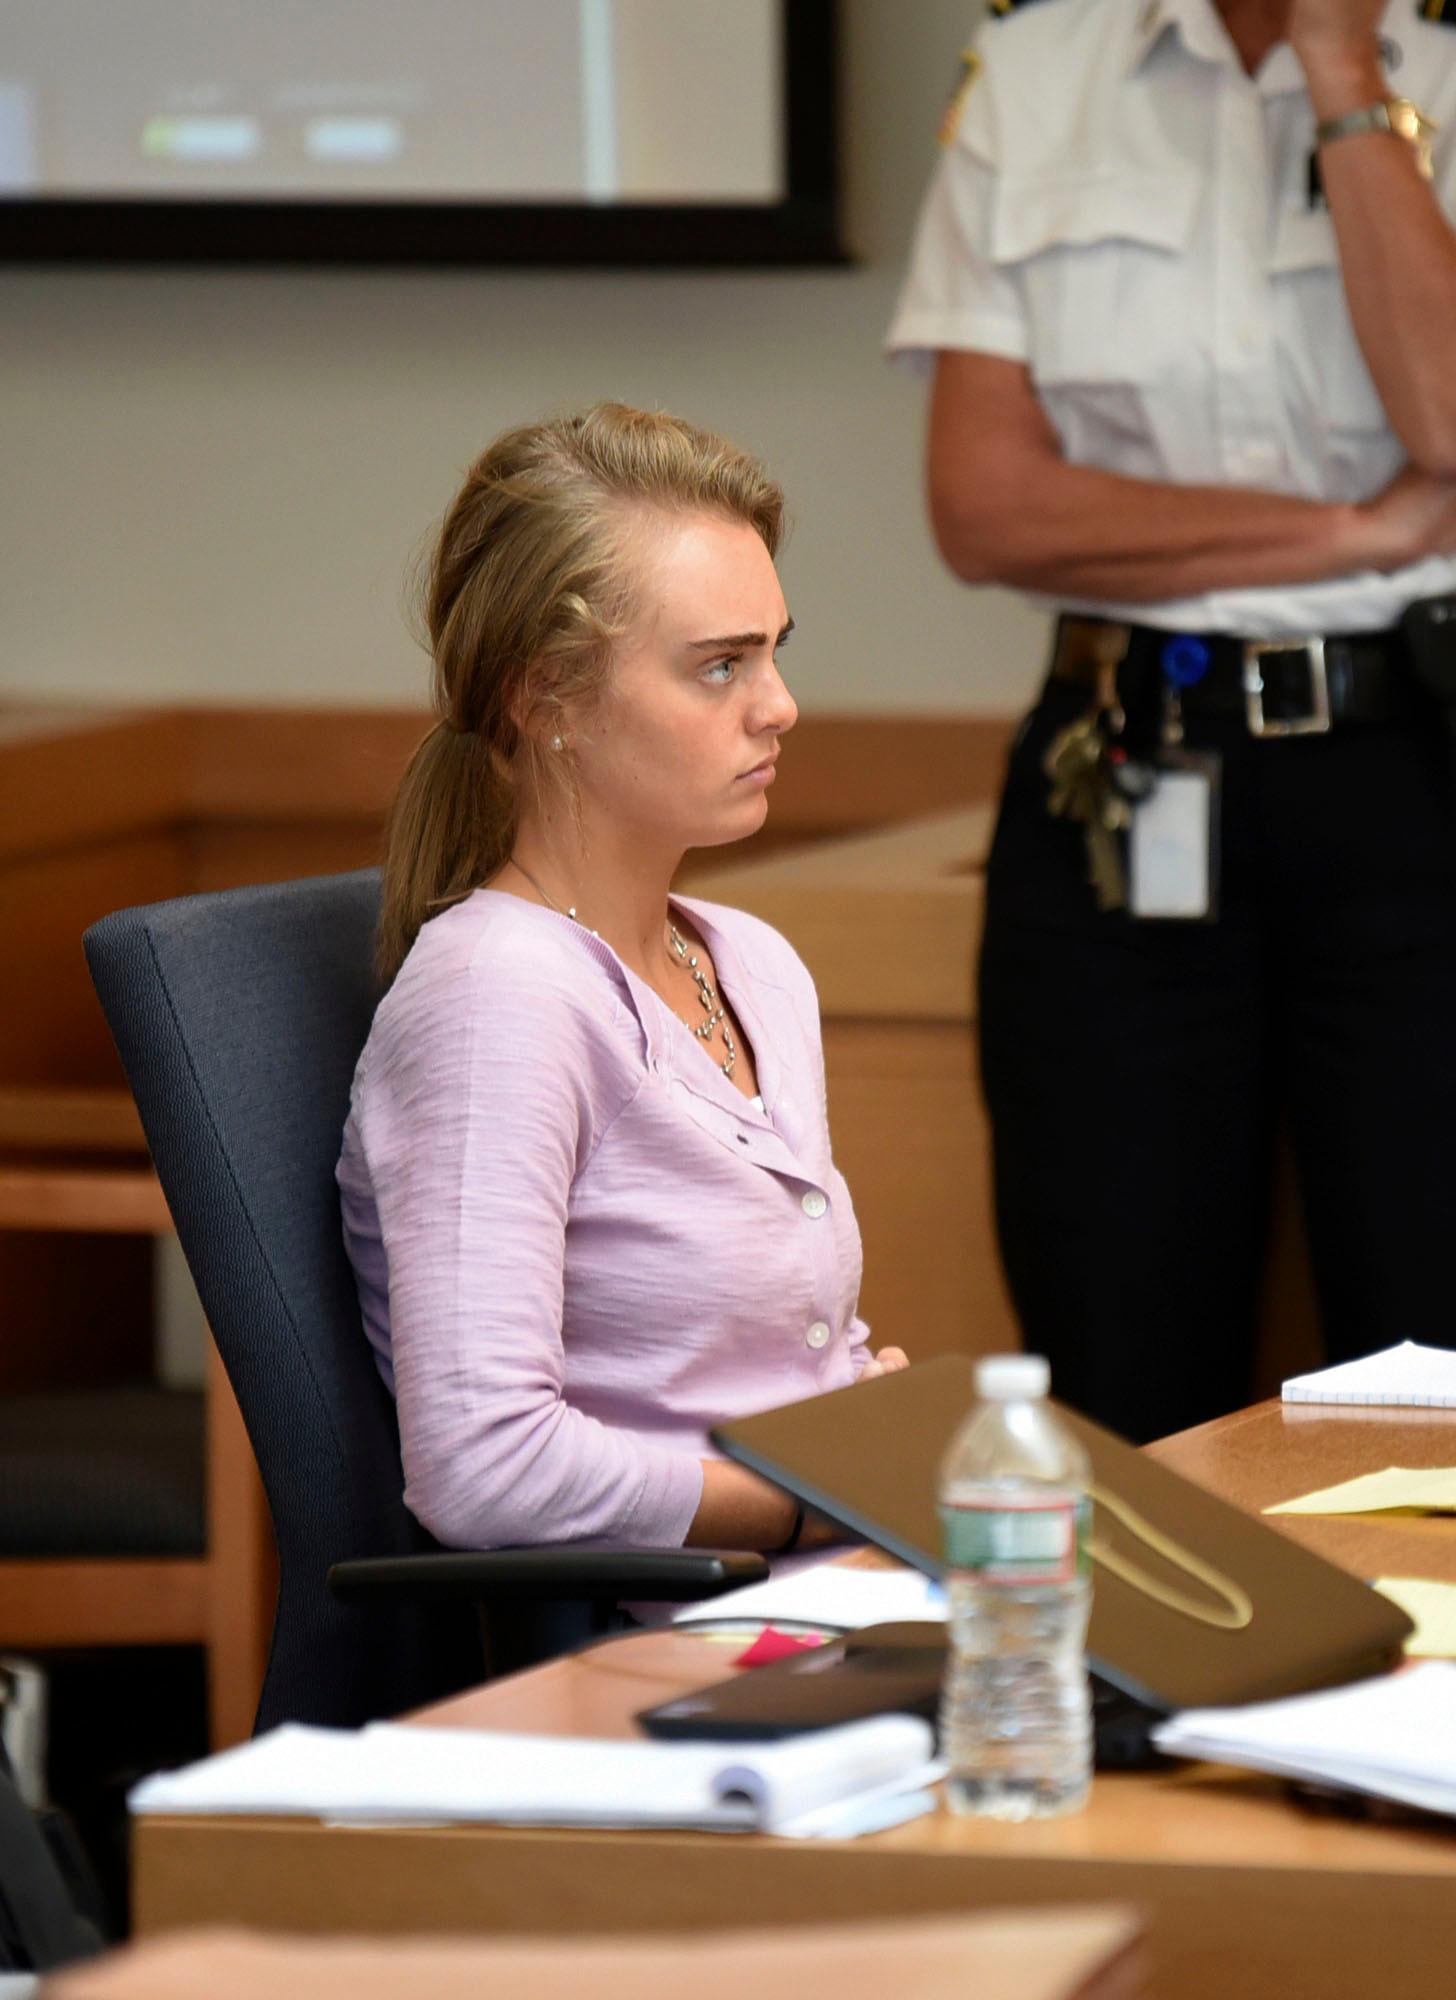 Teen who took life in texting case studied suicide methods | KOMO1456 x 2000